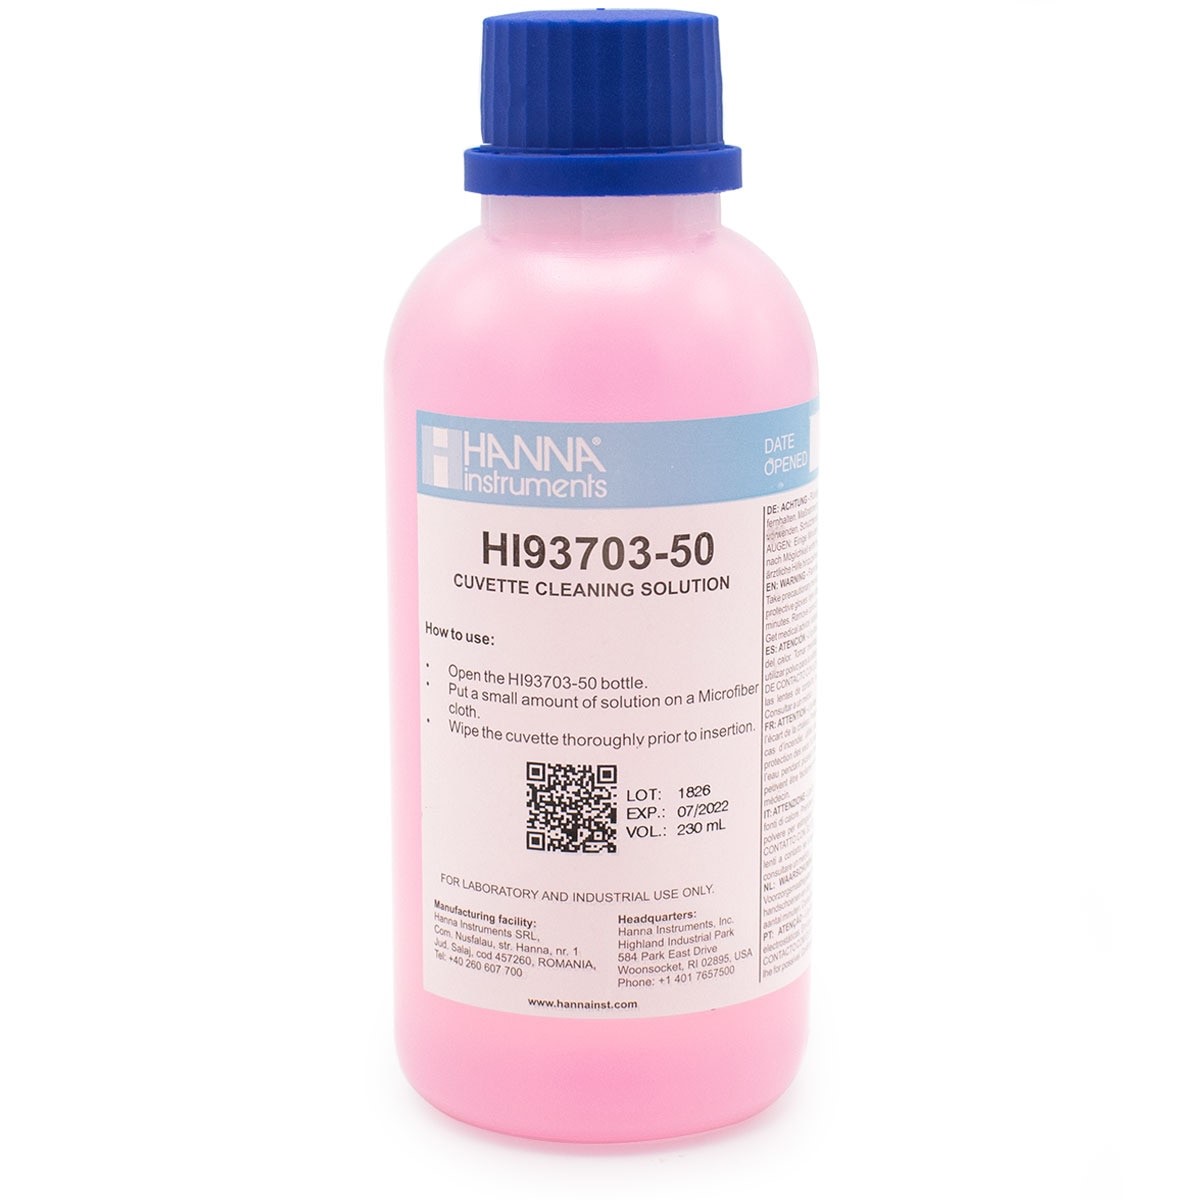 HI93703-50 Cuvette Cleaning Solution (230 mL)